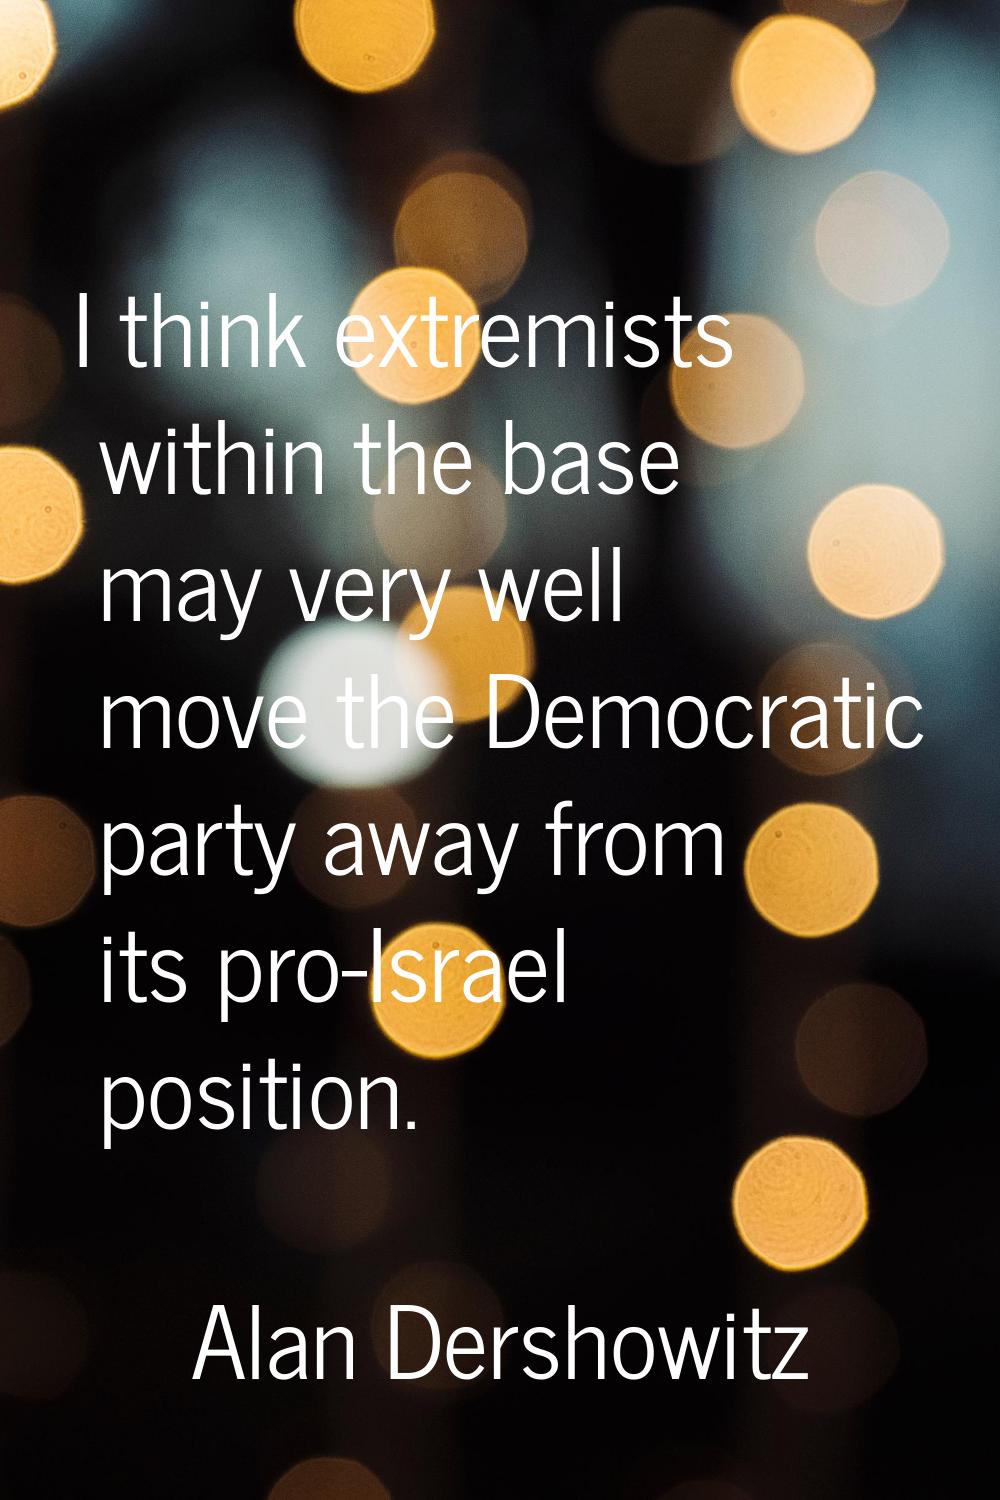 I think extremists within the base may very well move the Democratic party away from its pro-Israel